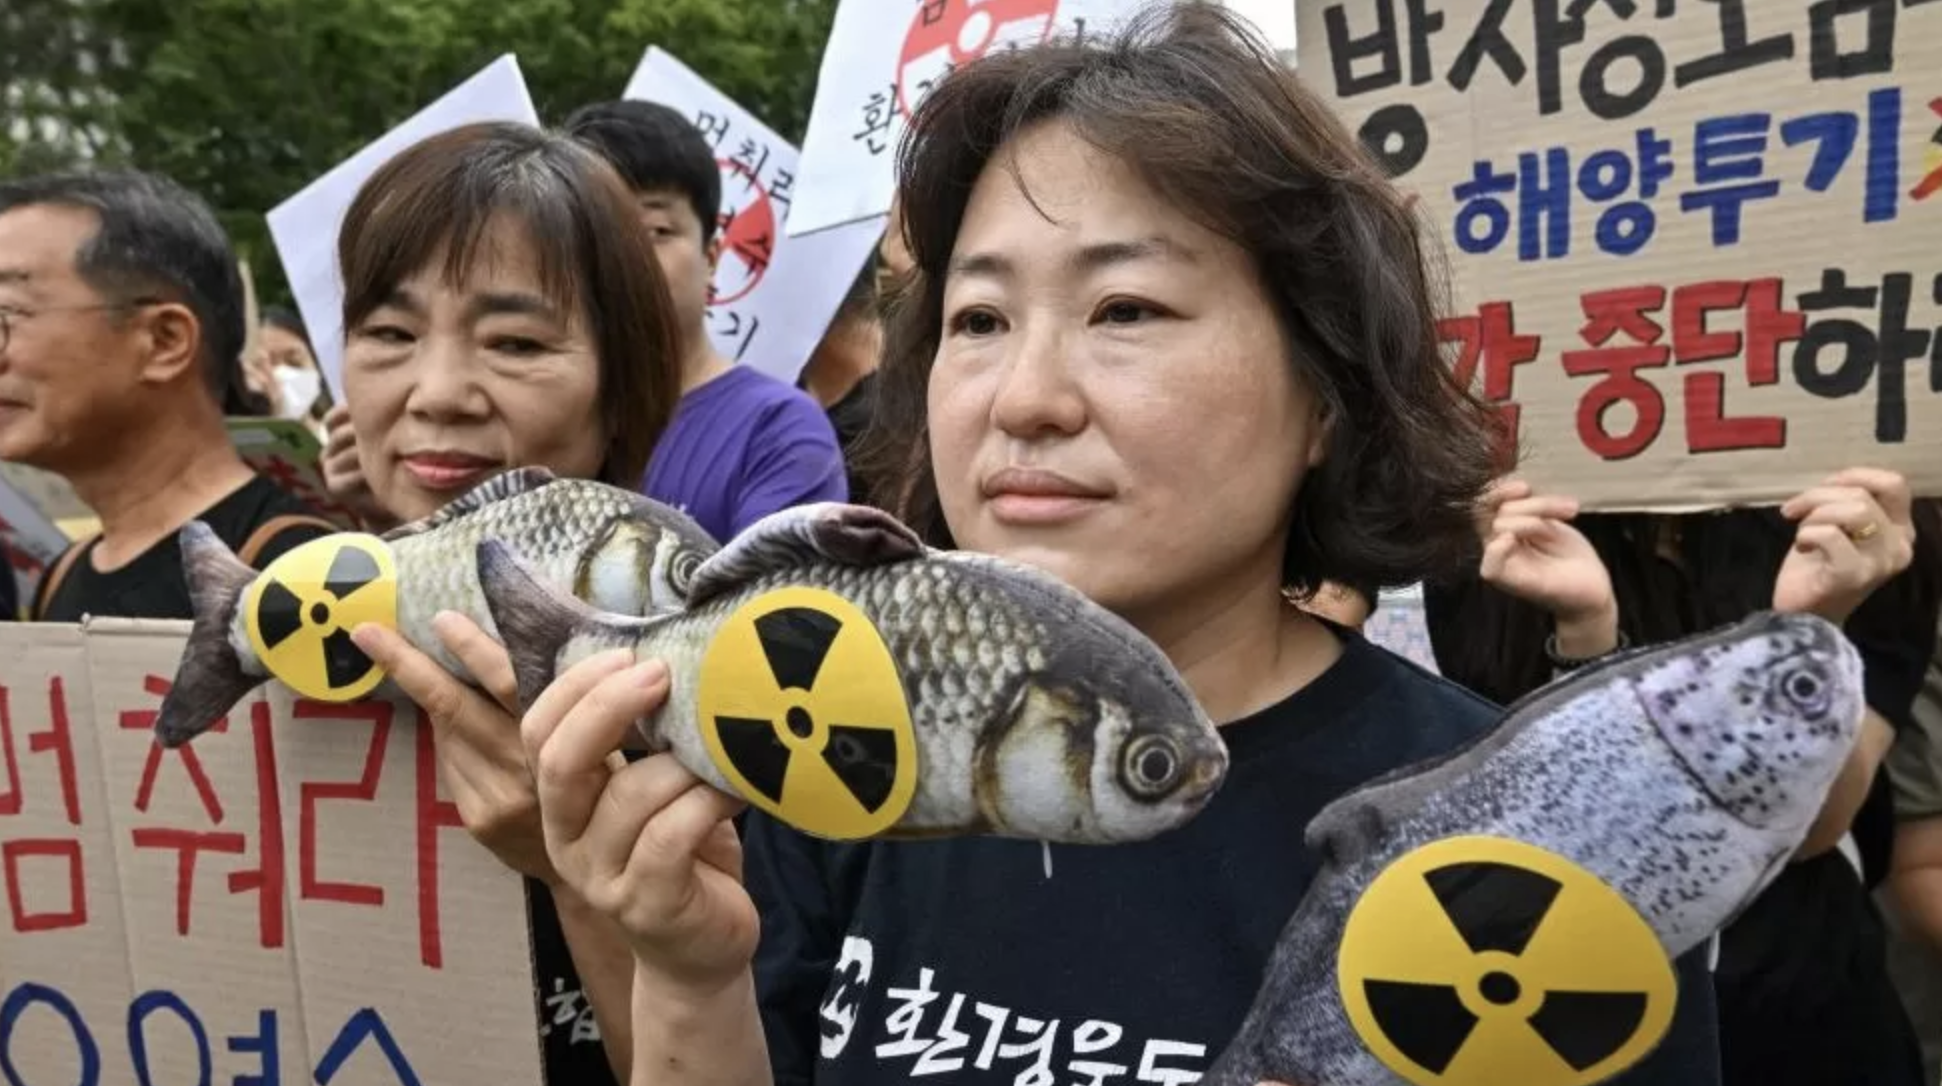 Ripples of Radioactivity: Fukushima's Water Release & Global Environmental Concerns — The Climate Club